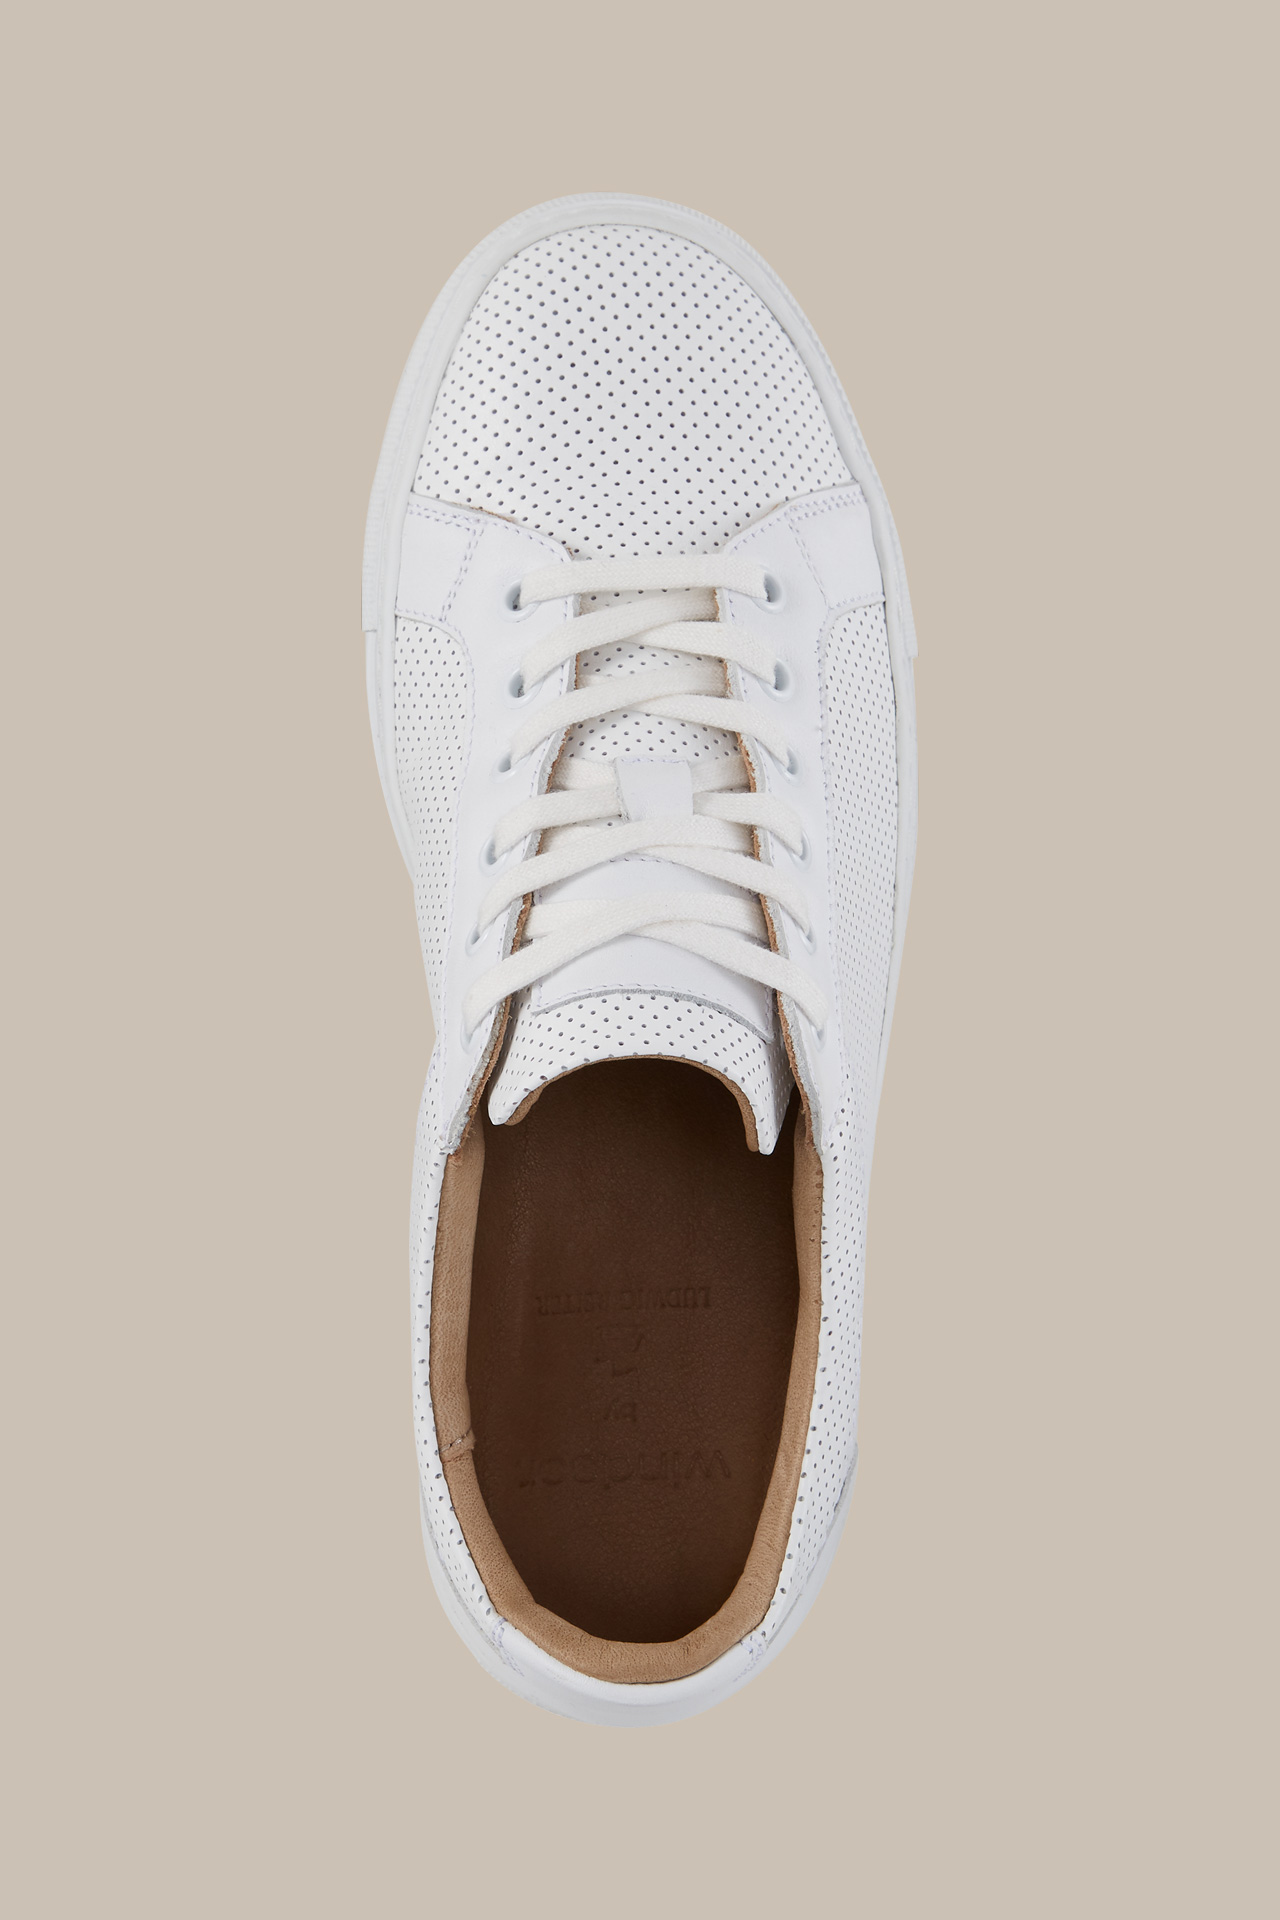 Flat Tennis Trainers by Ludwig Reiter in White, Unisex